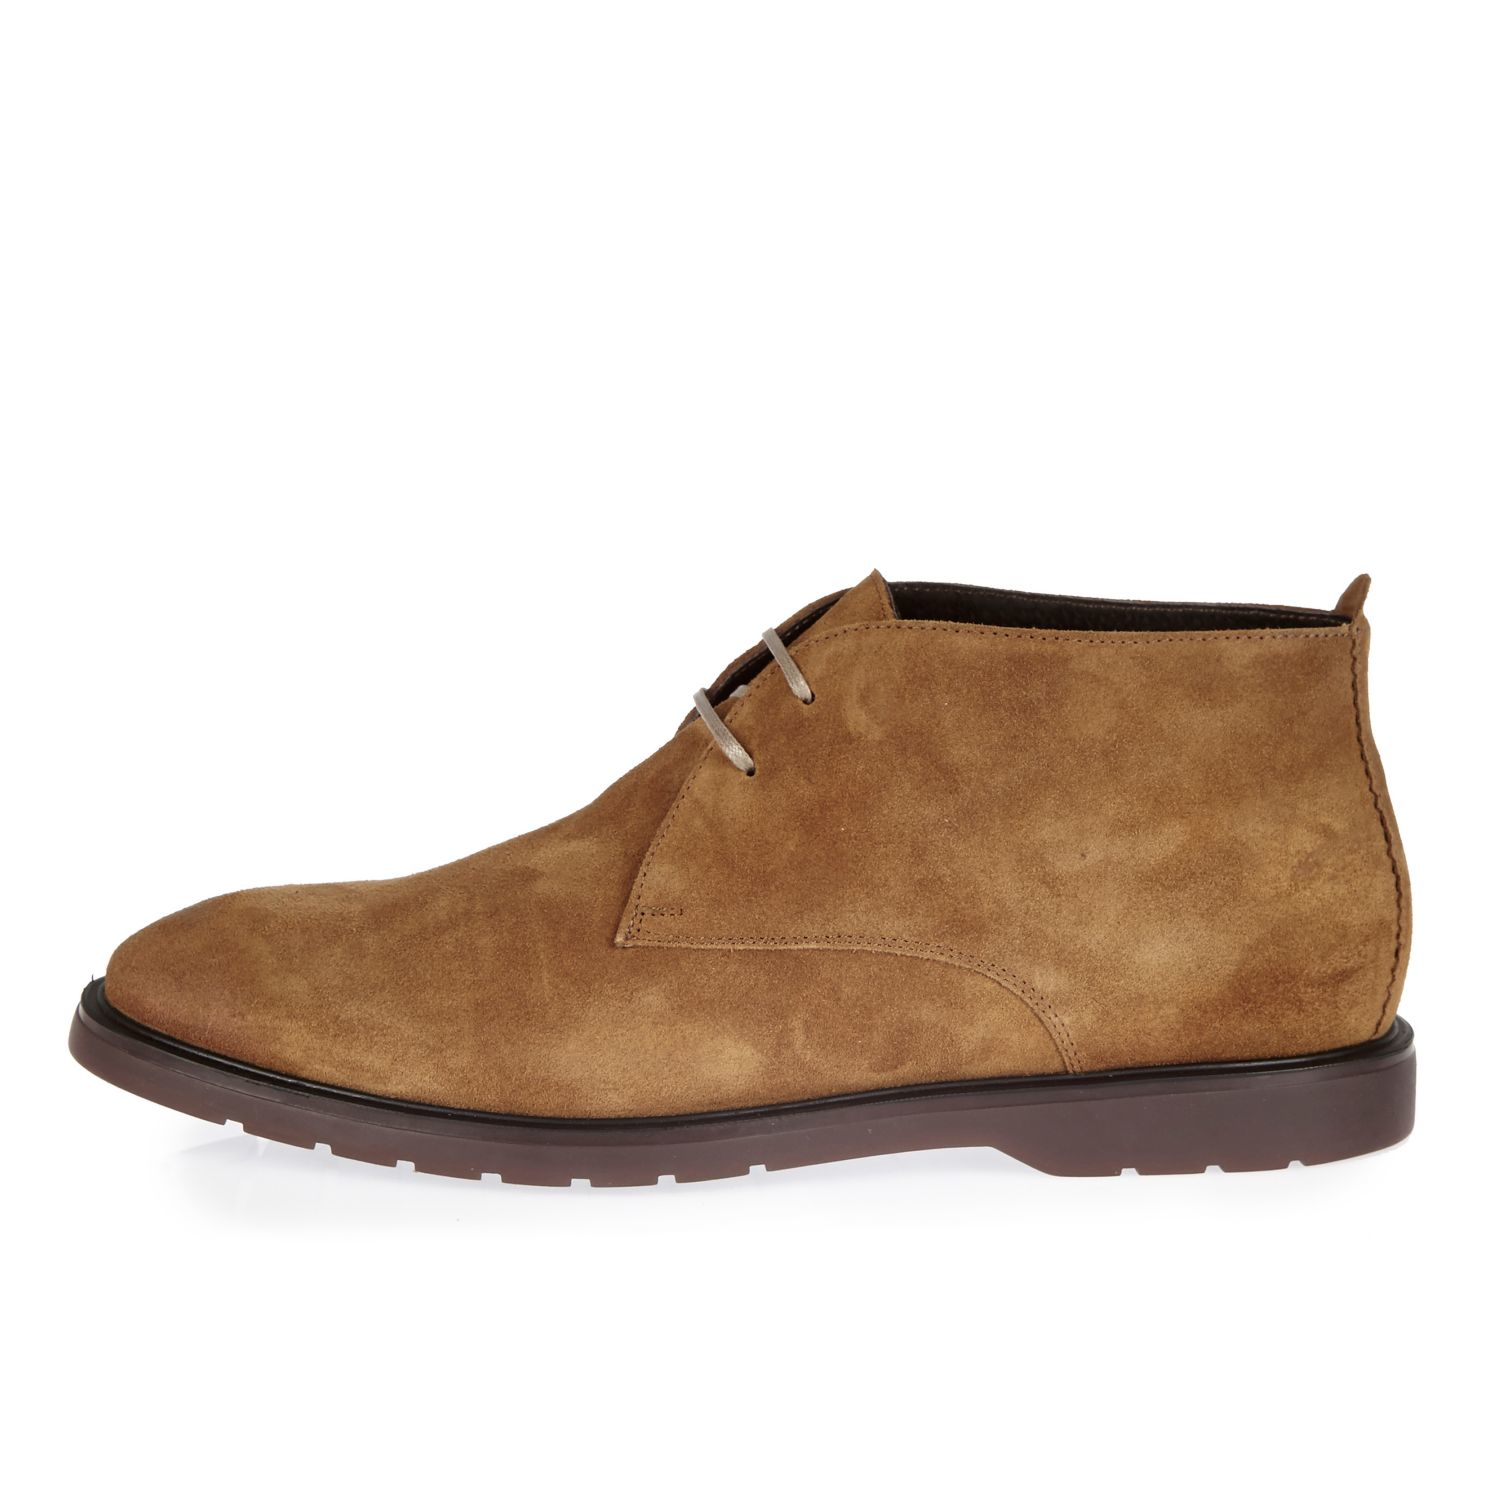 River Island Brown Italian Leather Chukka Boots for Men - Lyst